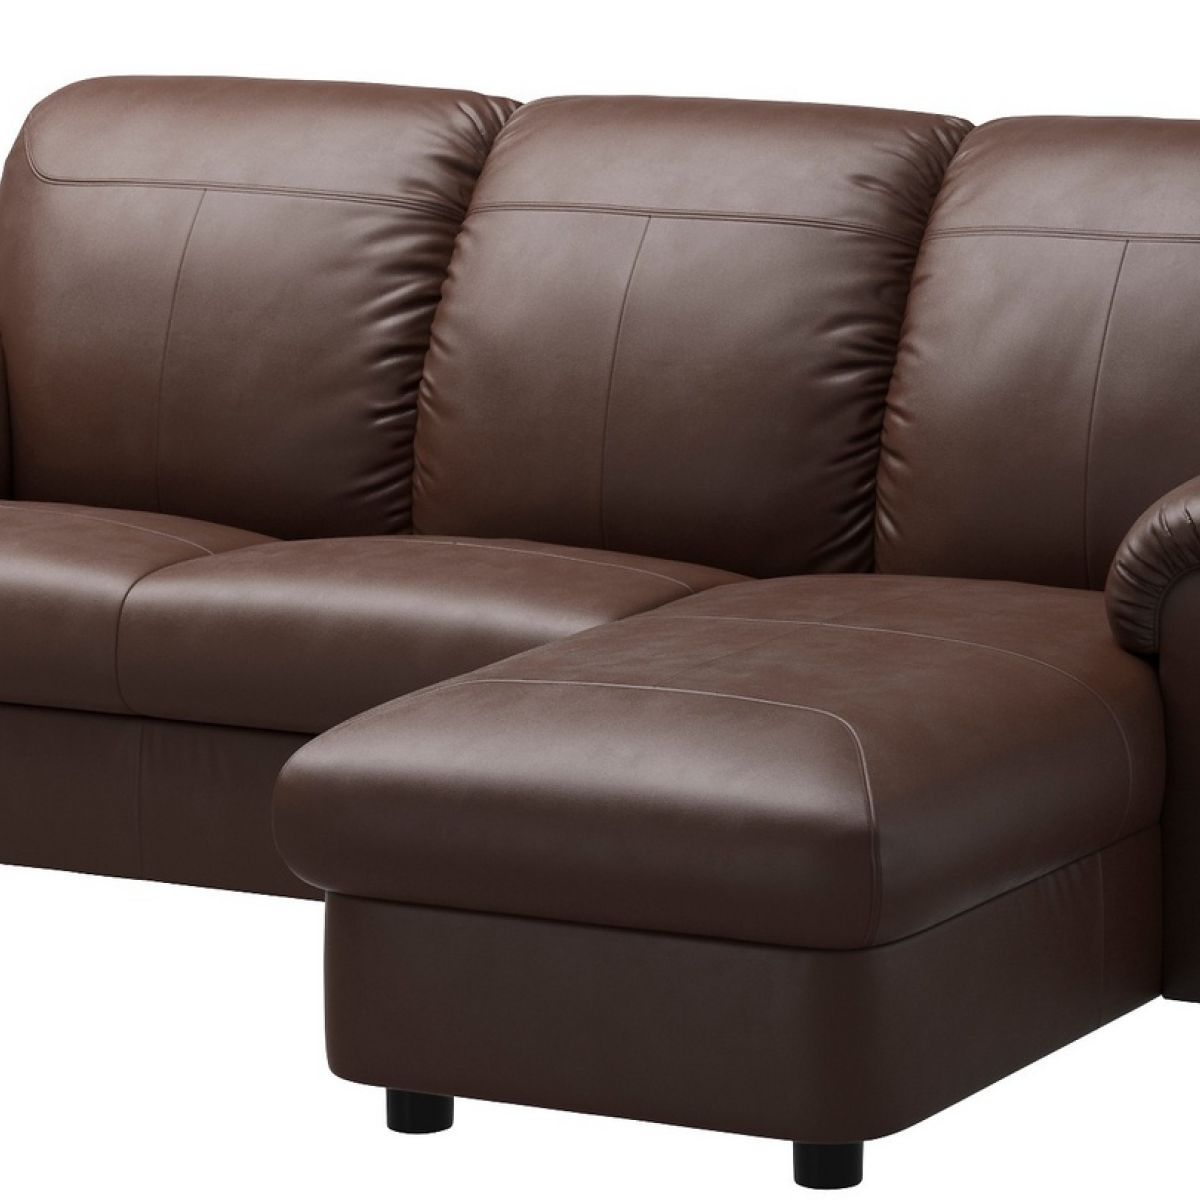 fake leather couch